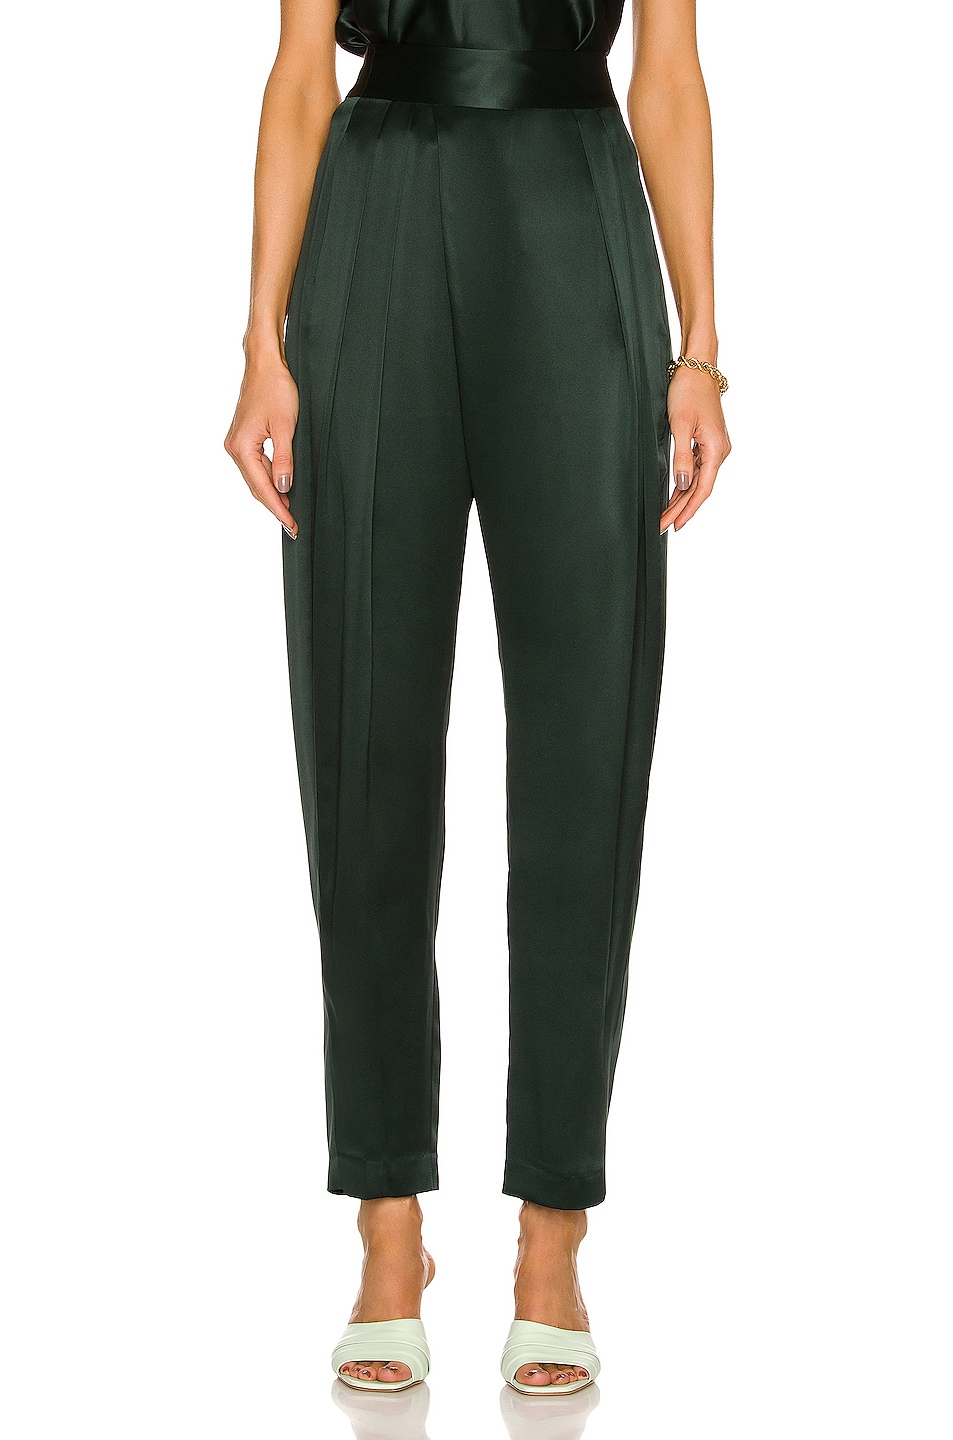 Image 1 of The Sei Draped Pleat Trouser Pant in Hunter